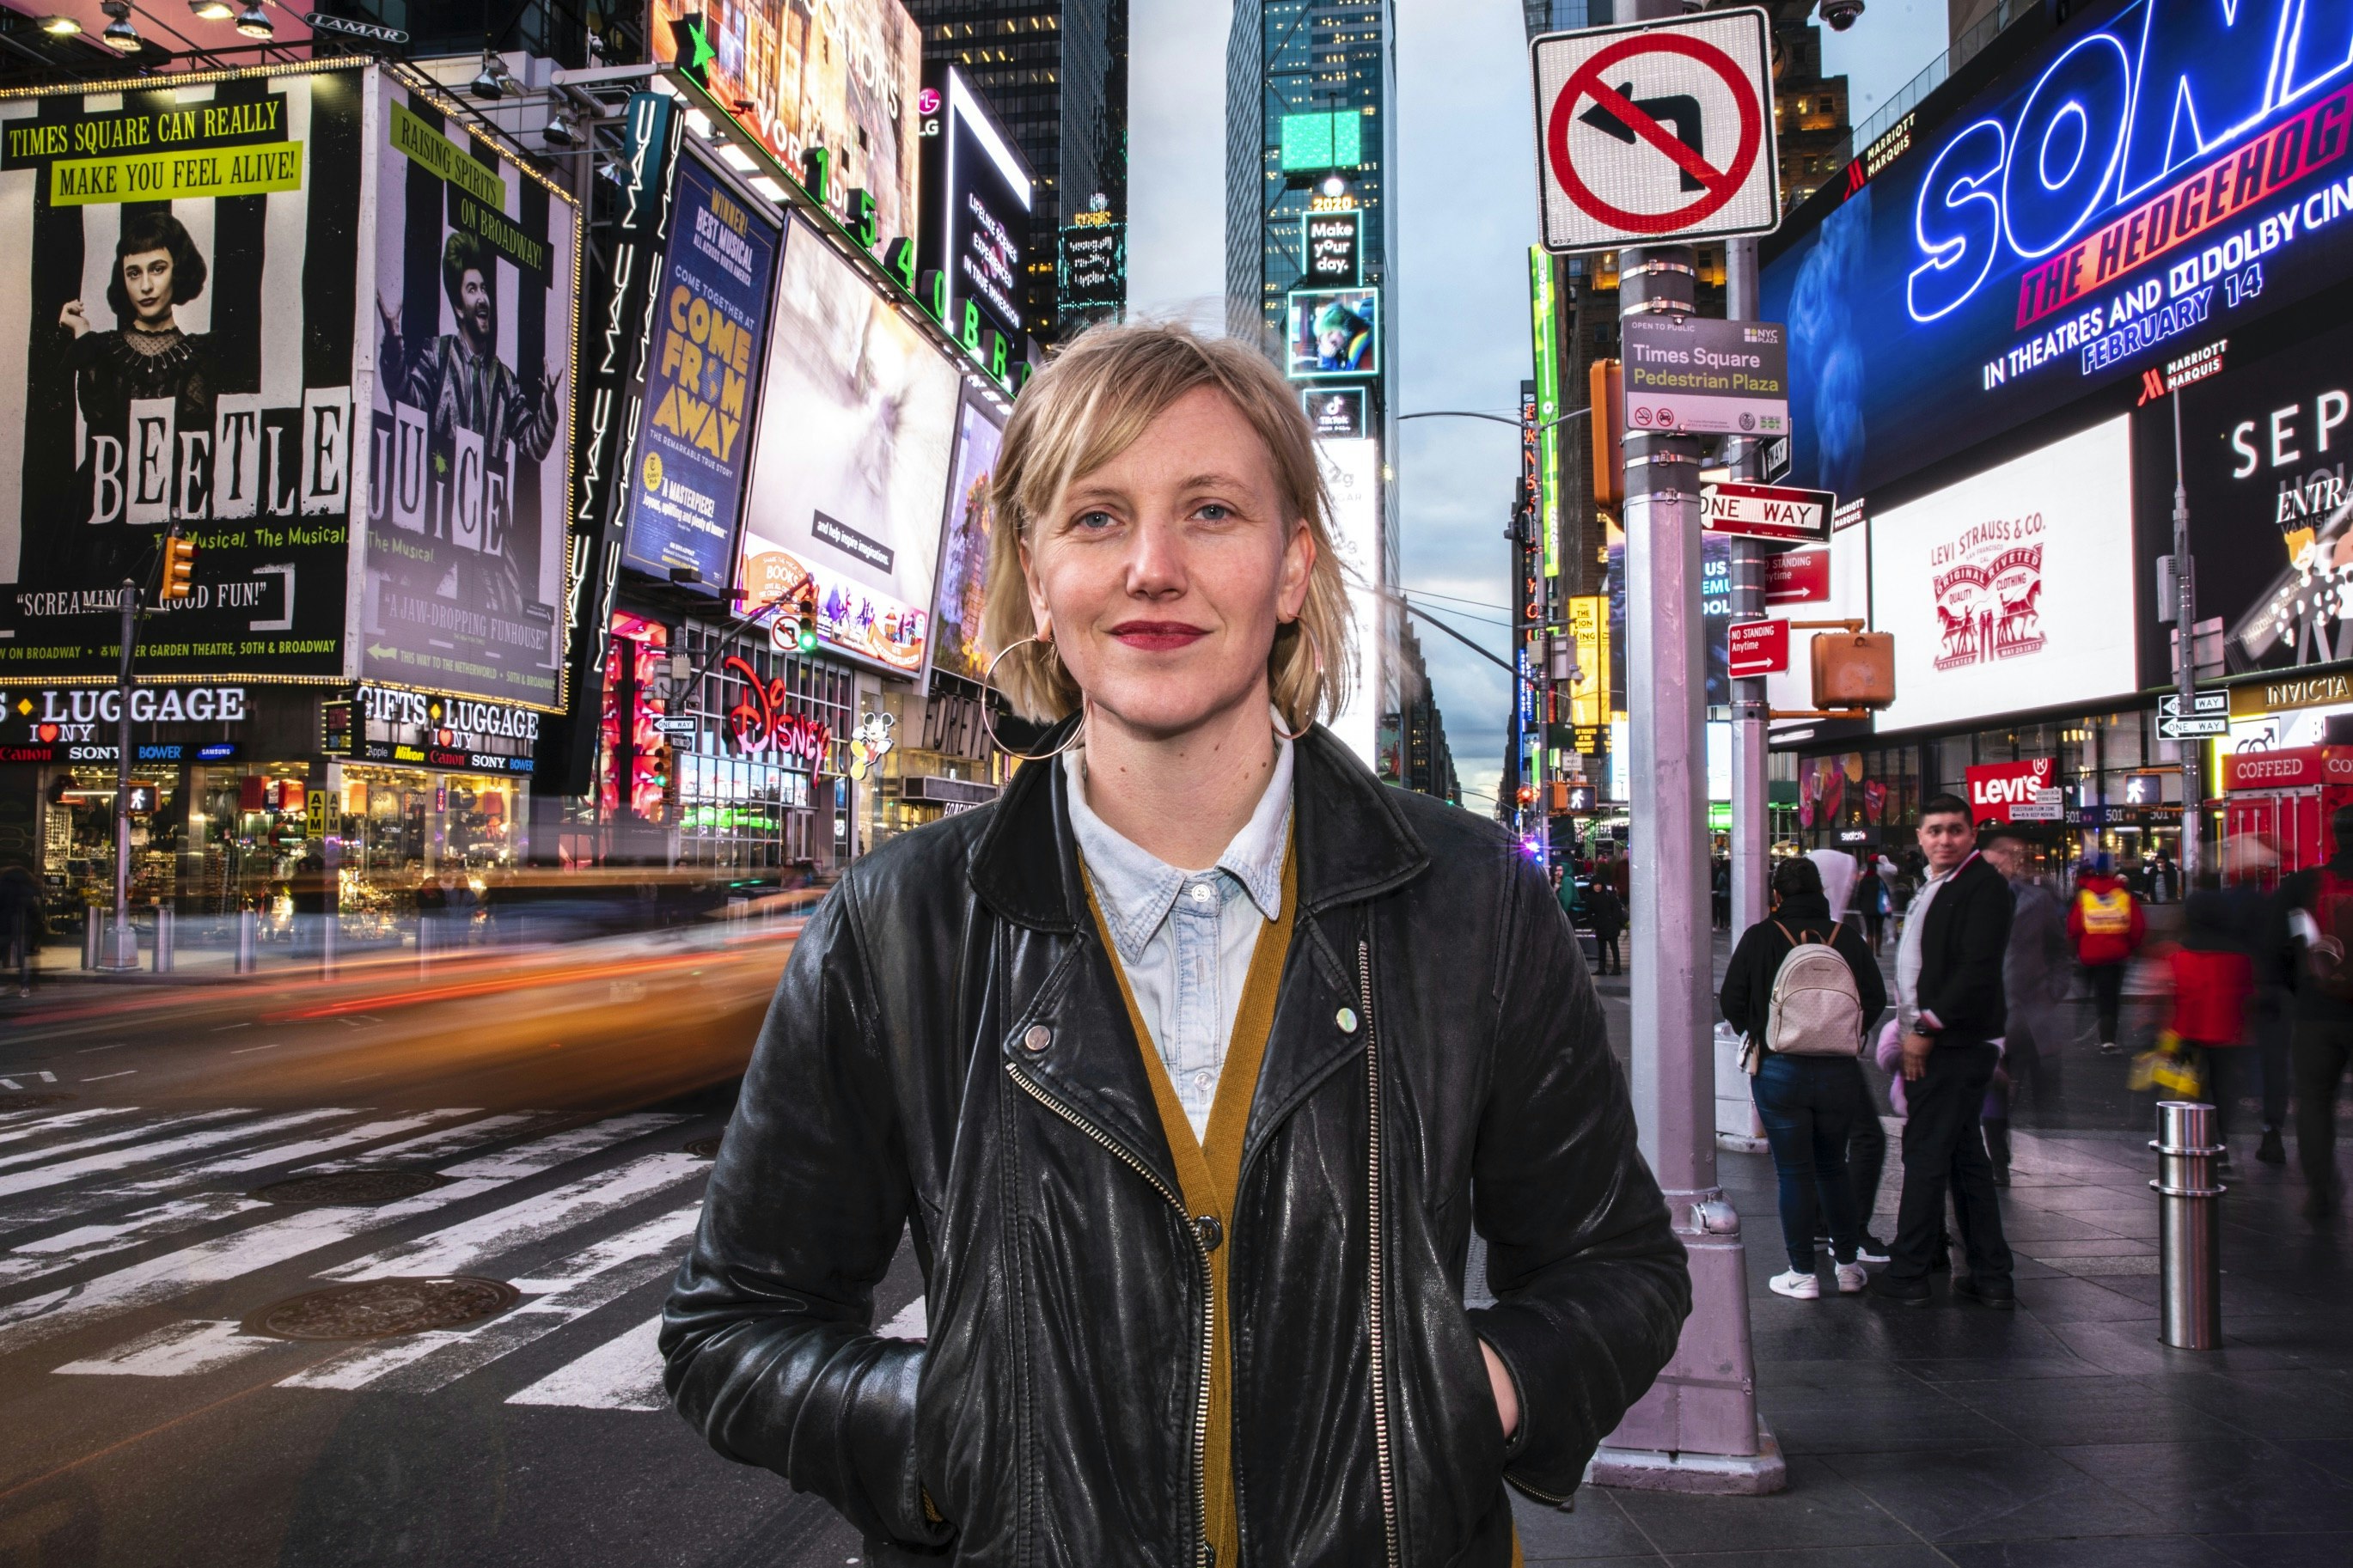 Artist Robin Frohardt standing in Times Square at night